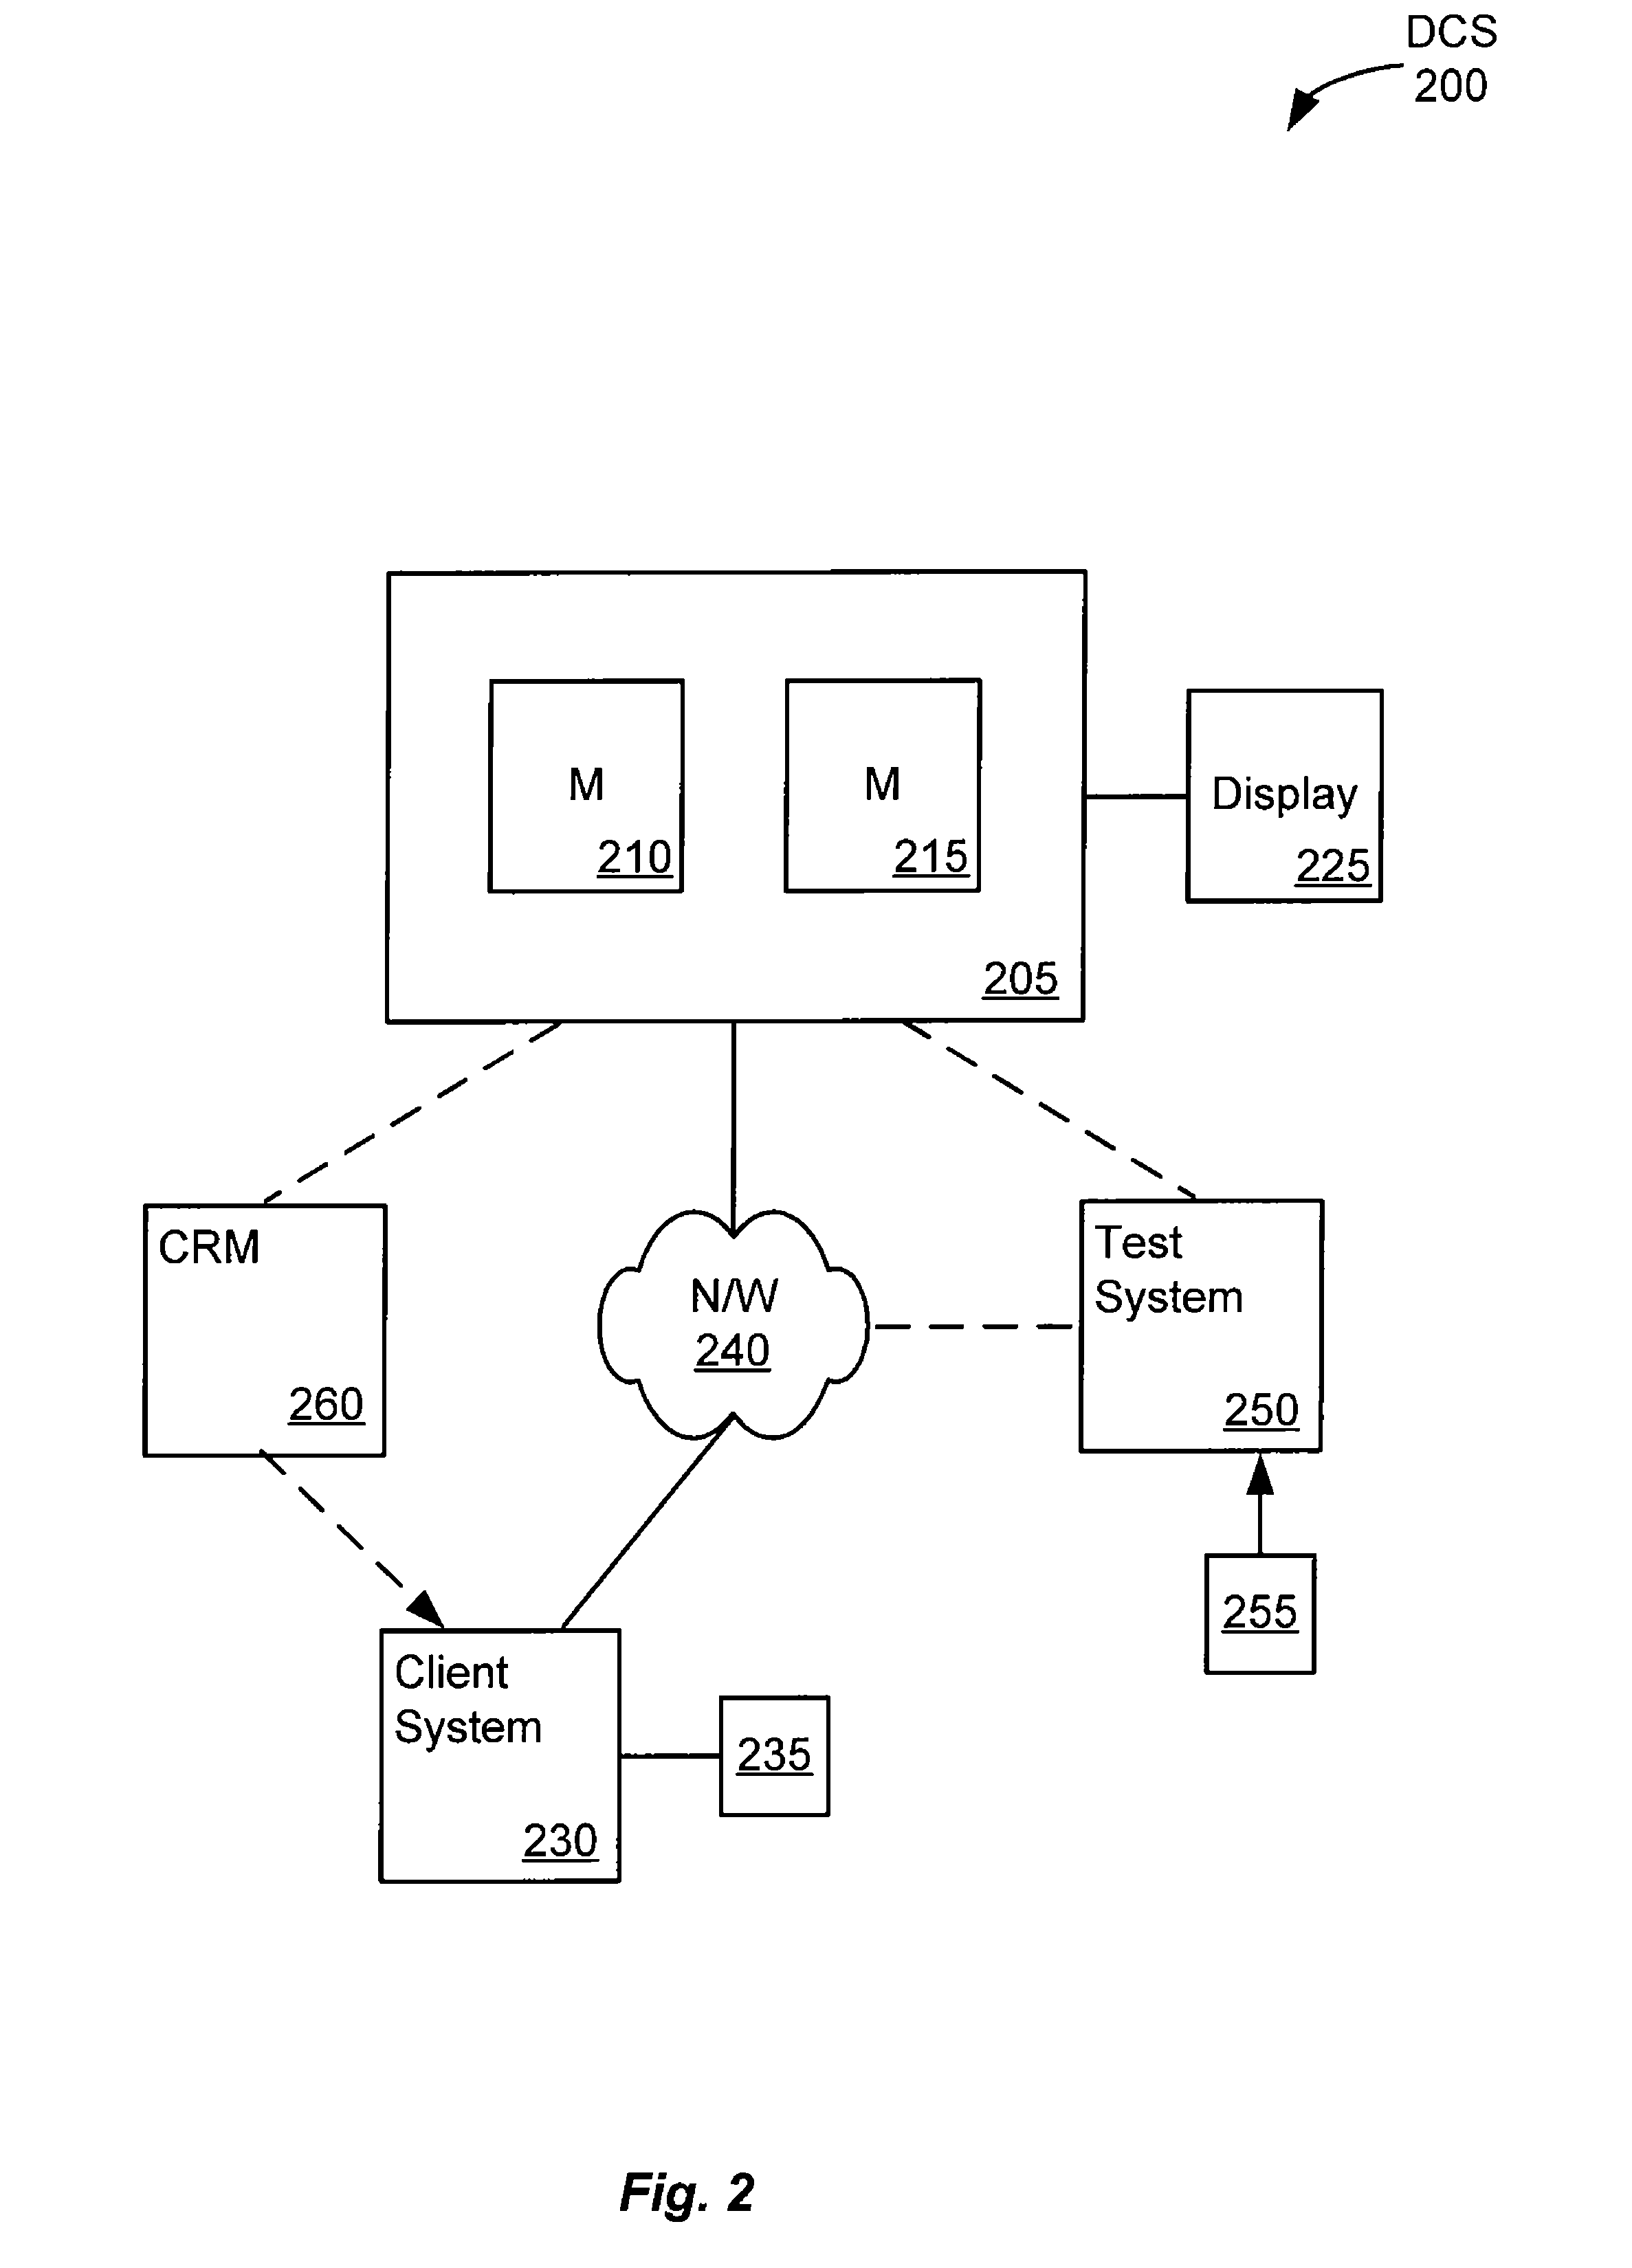 Method and system for assisting in diagnosing irritable bowel syndrome